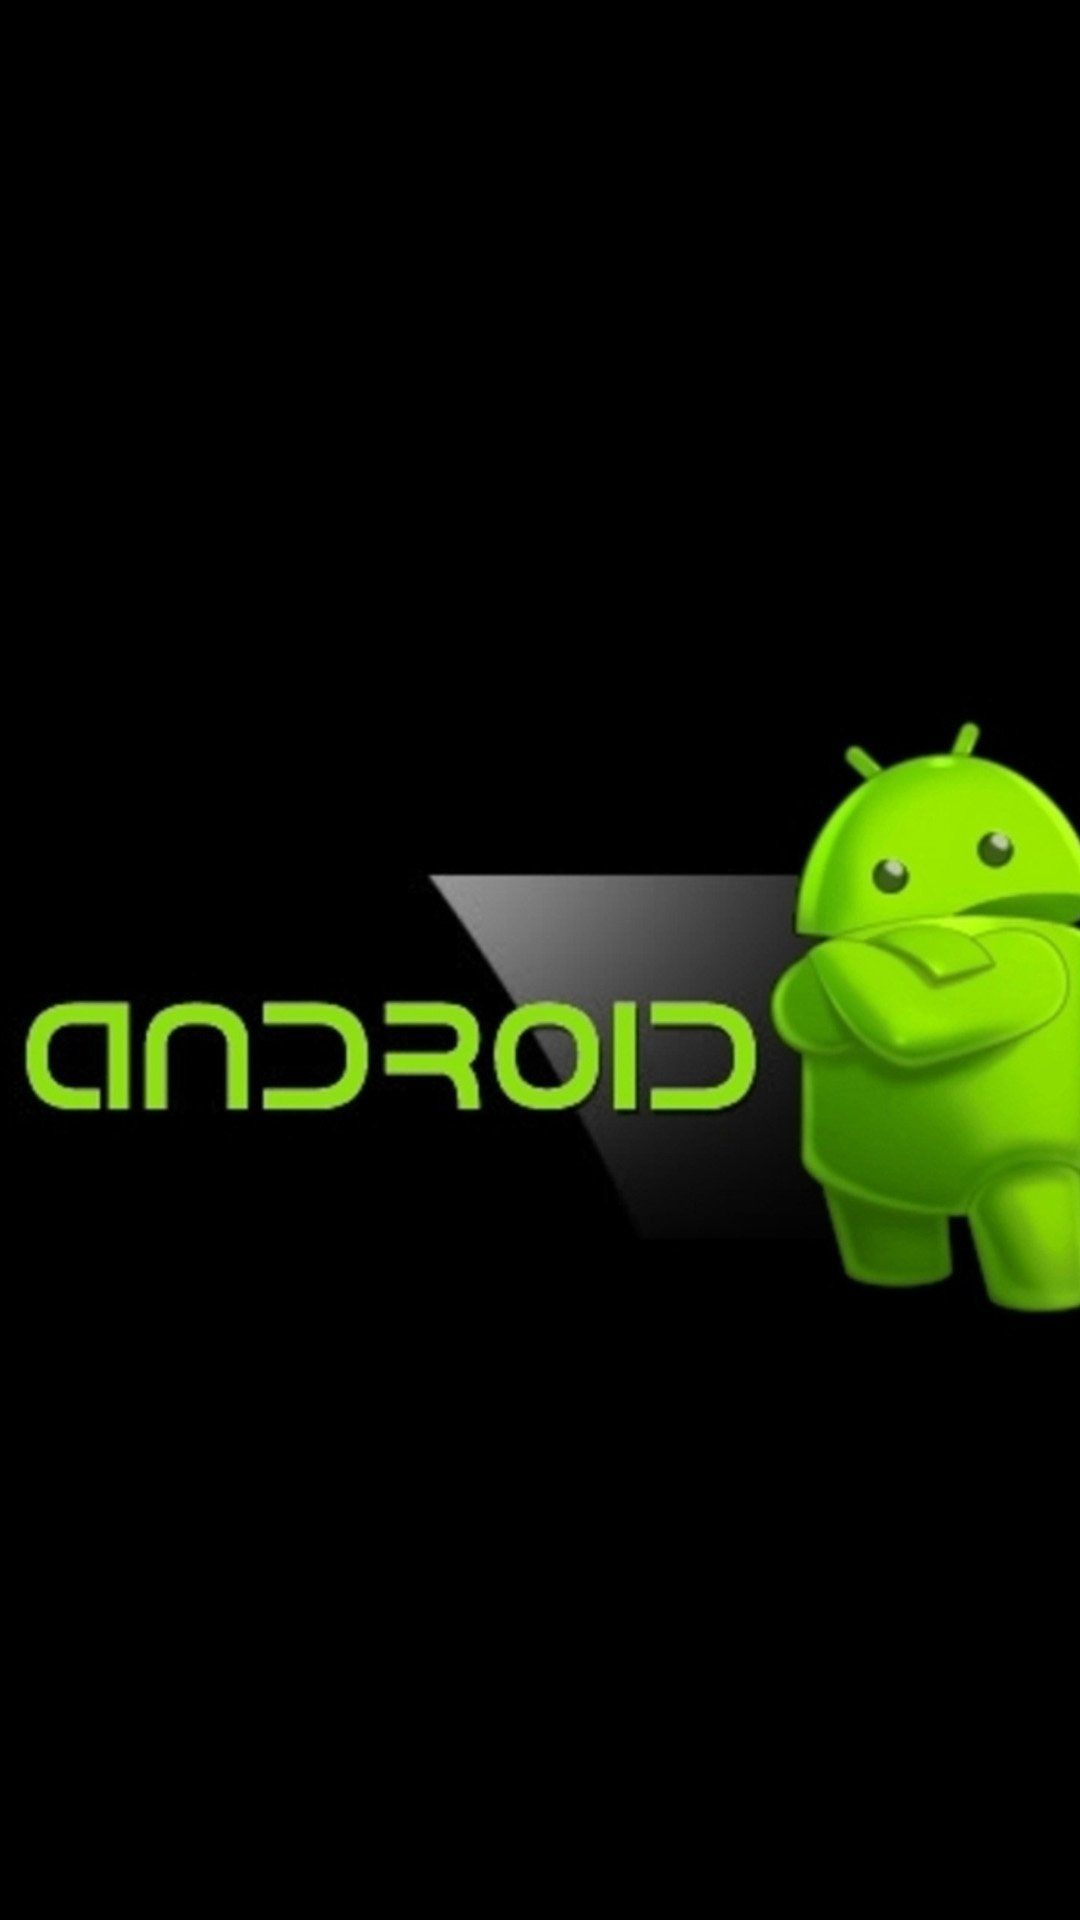 Free download Green Android LOGO 01 Galaxy S5 Wallpaper HD [1080x1920] for your Desktop, Mobile & Tablet. Explore Android Logo Wallpaper. Android Phone Wallpaper HD, Android HD Wallpaper for